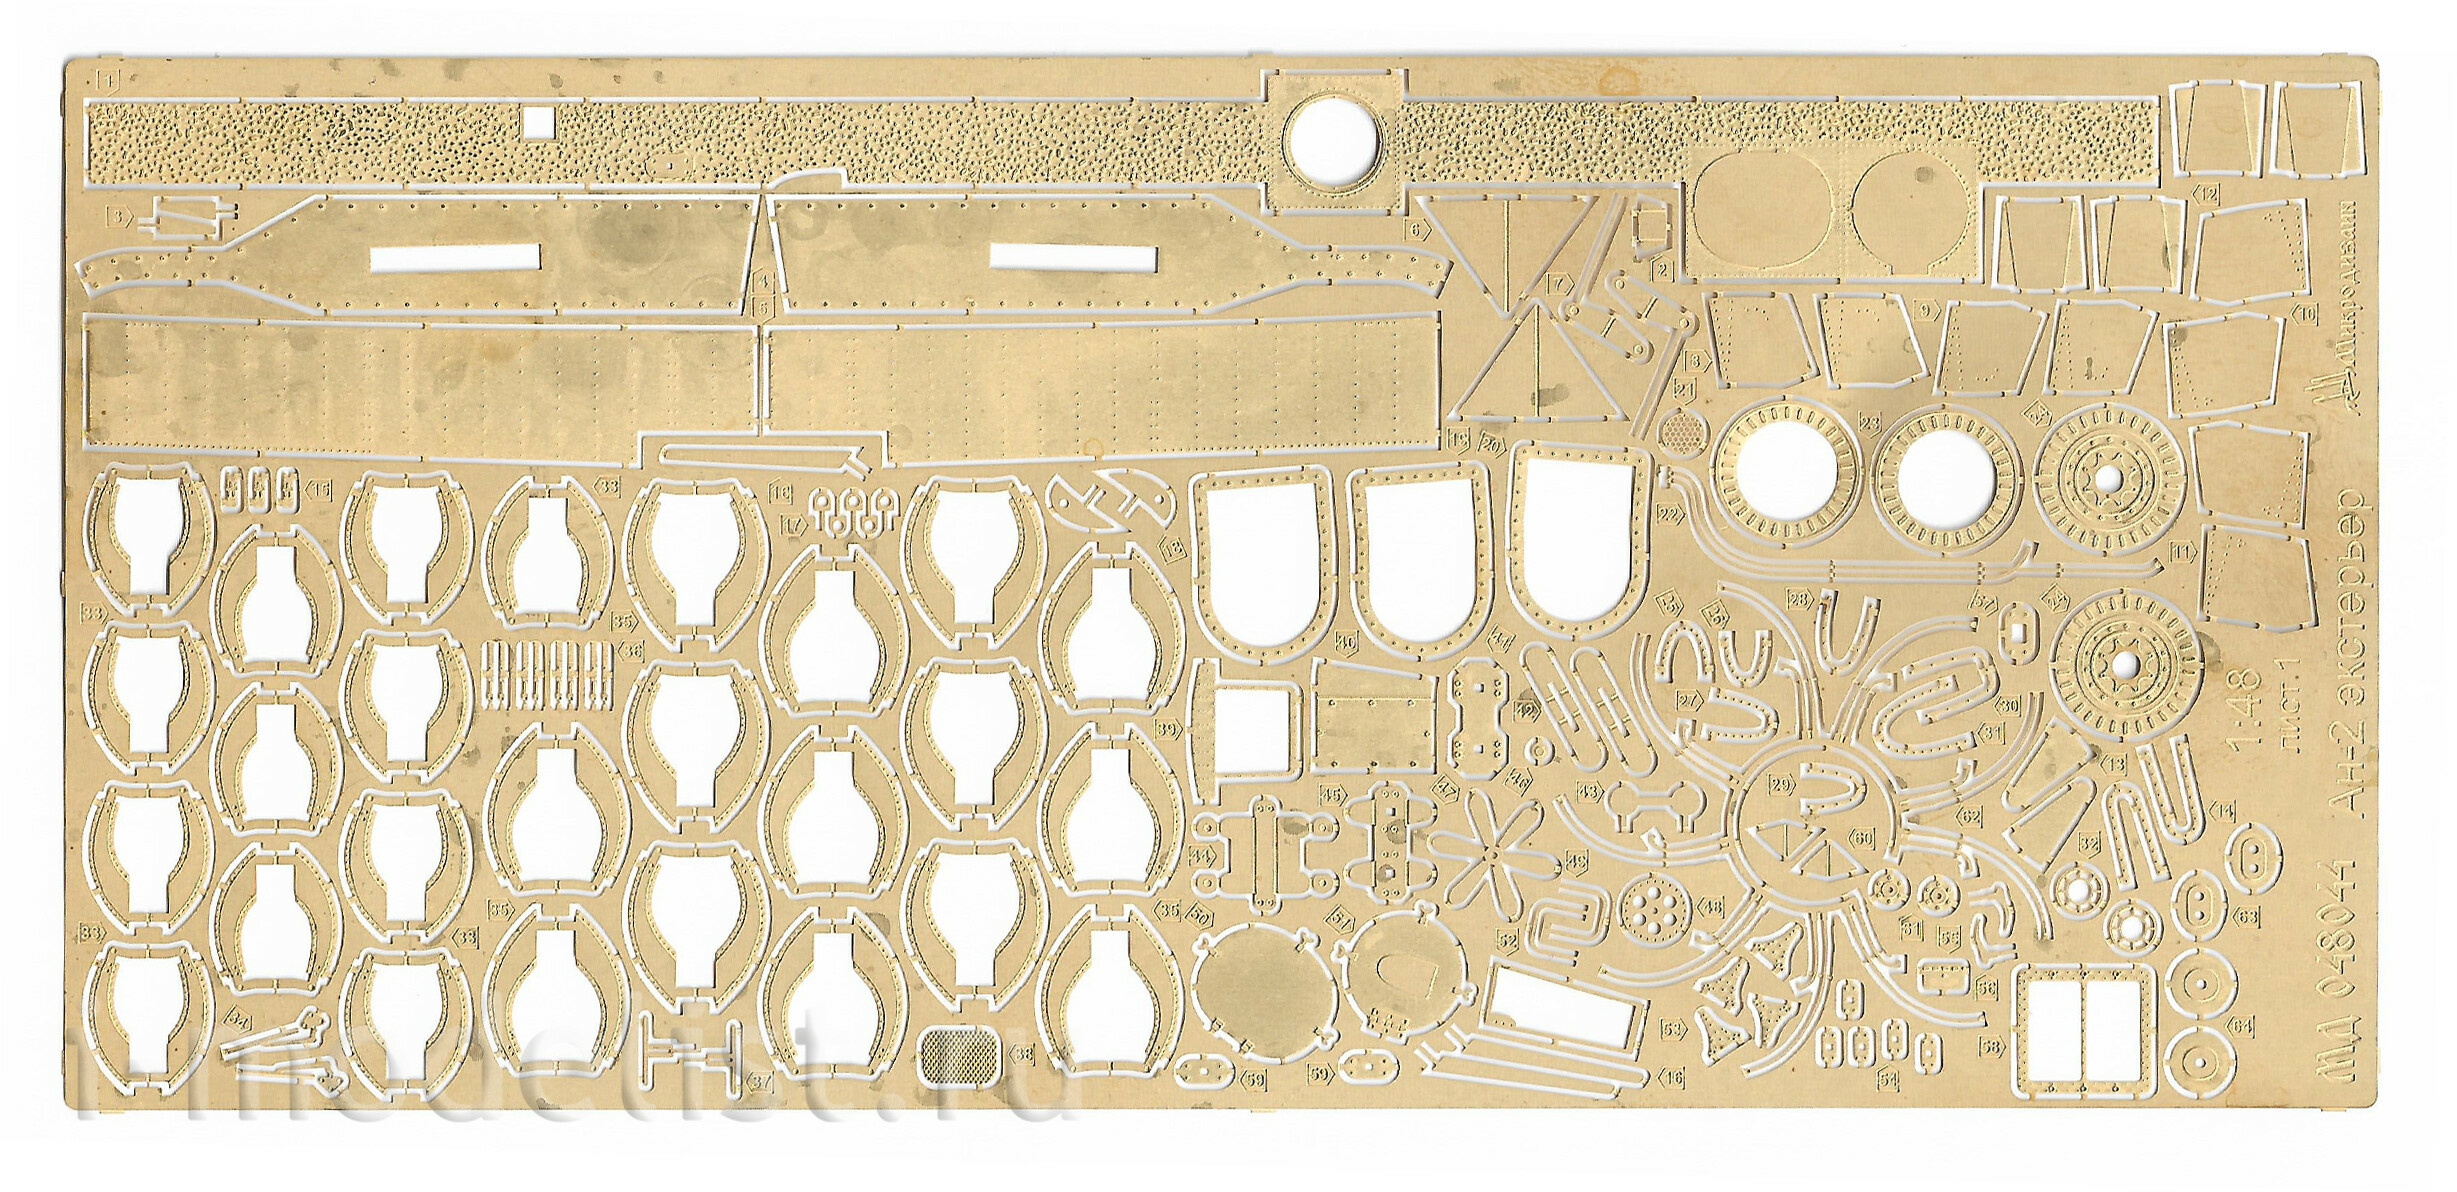 048044 Microdesign 1/48 Photo Etching kit for AN-2 (exterior)